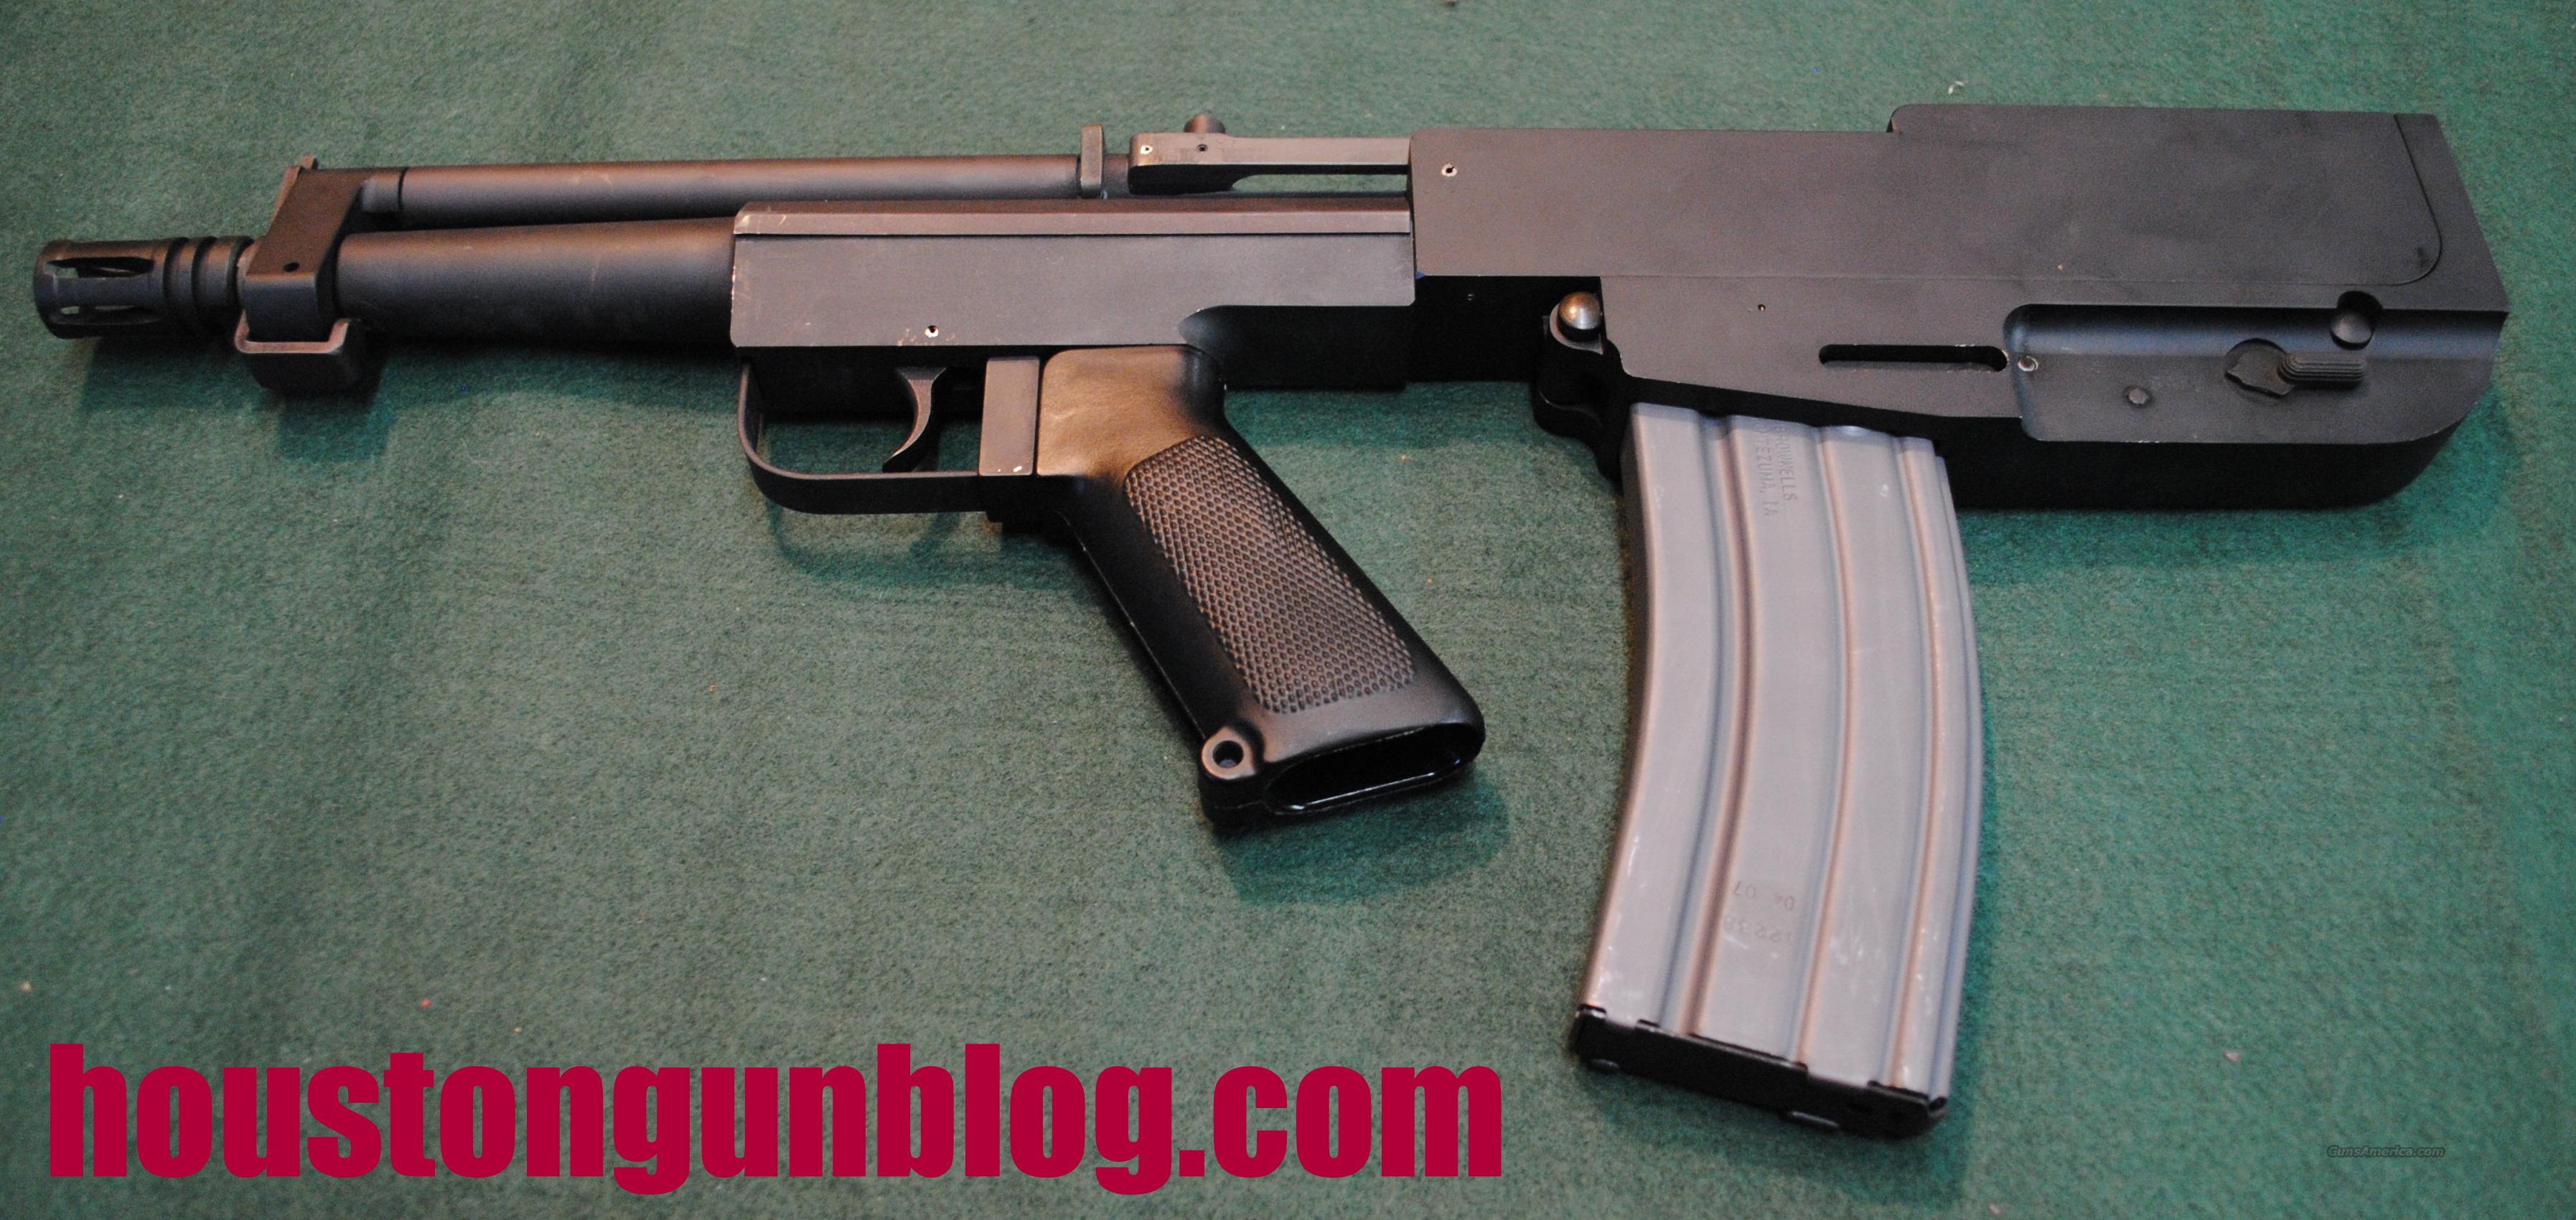 bushmaster serial number search